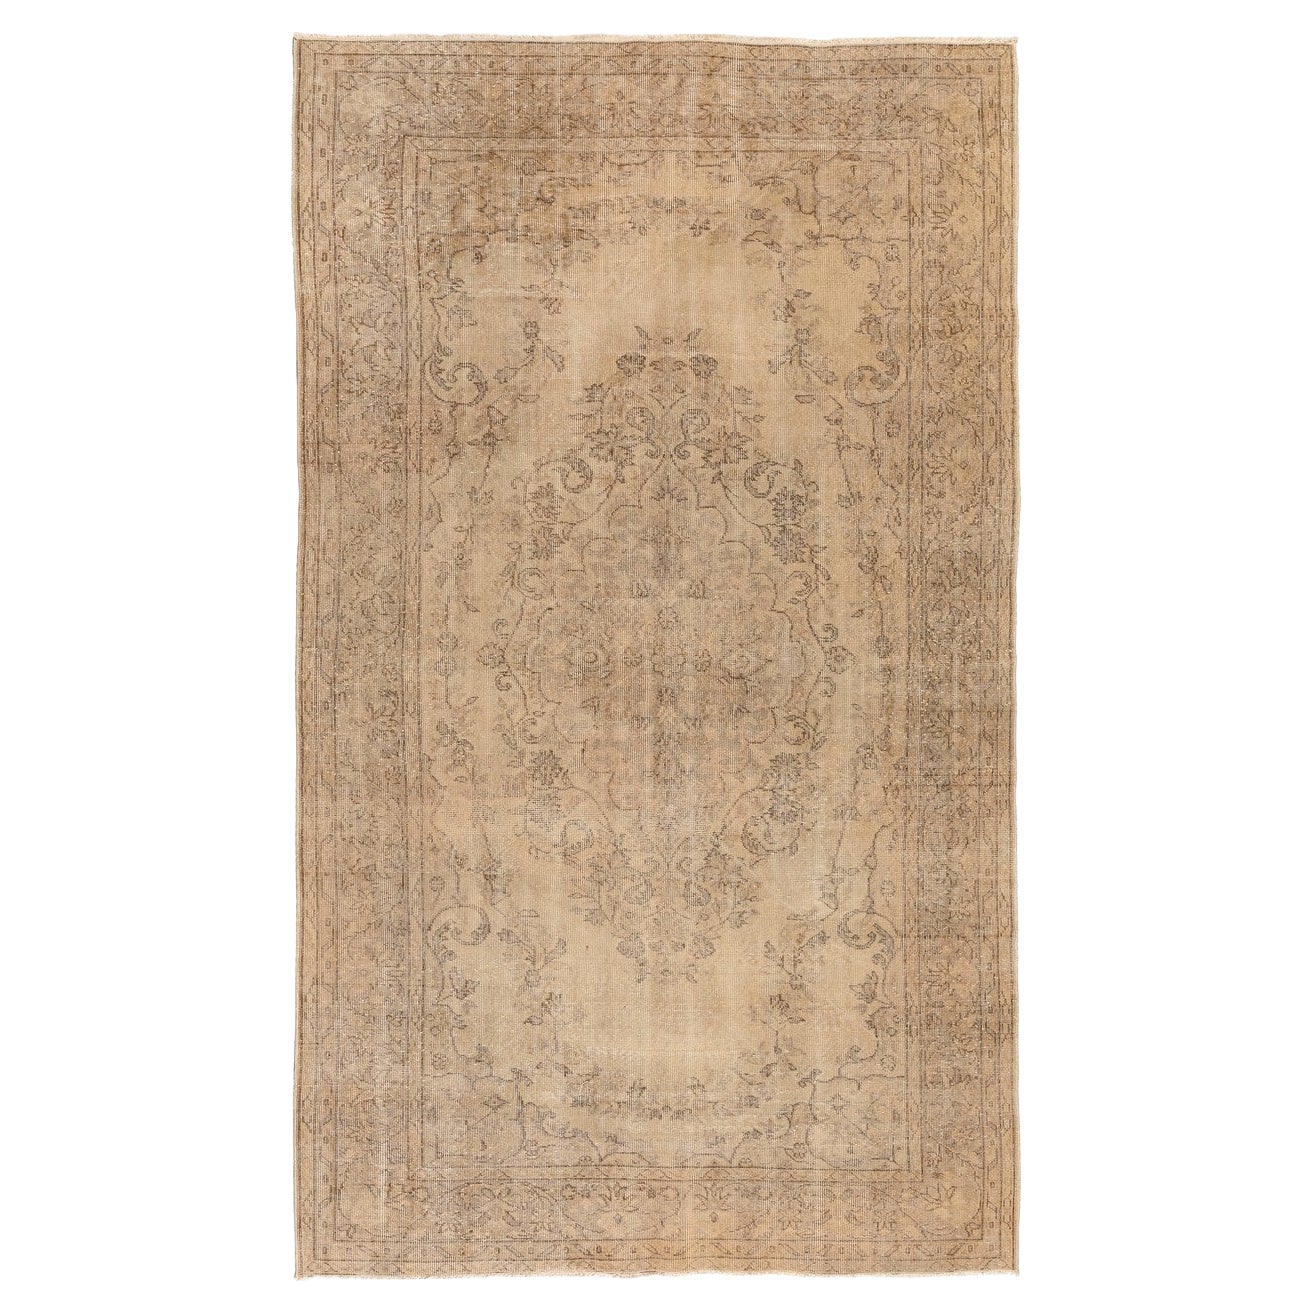 6x9.6 Ft One-of-a-Kind Vintage Handmade Turkish Oushak Wool Area Rug in Beige For Sale